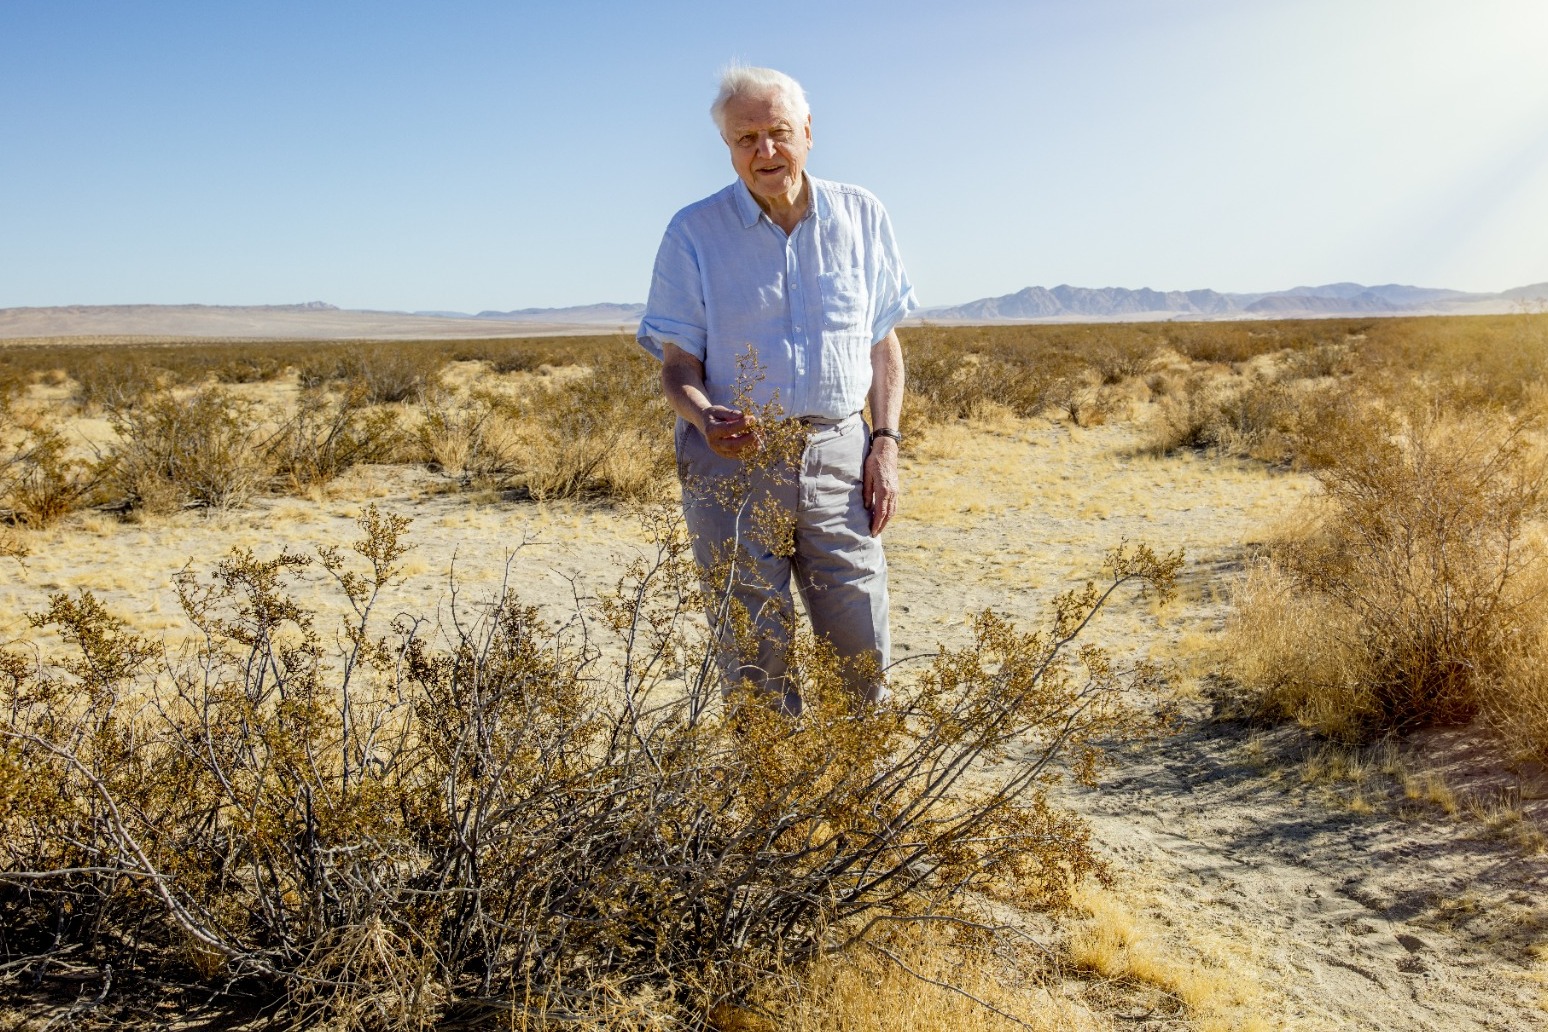 David Attenborough revisits desert plant he filmed 40 years previously 